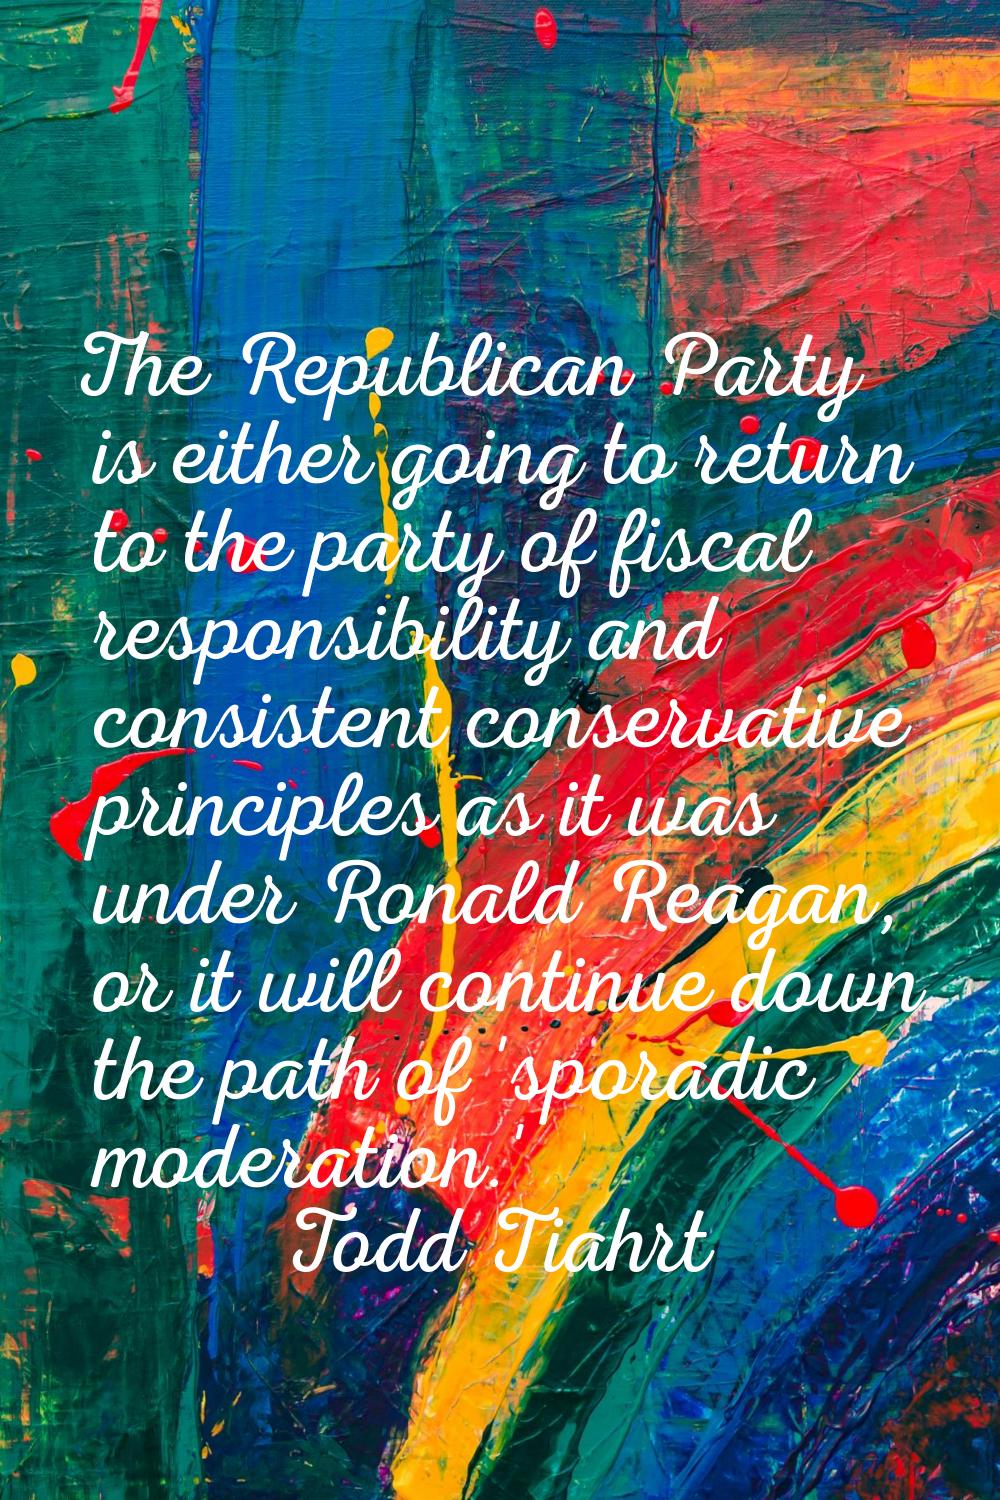 The Republican Party is either going to return to the party of fiscal responsibility and consistent